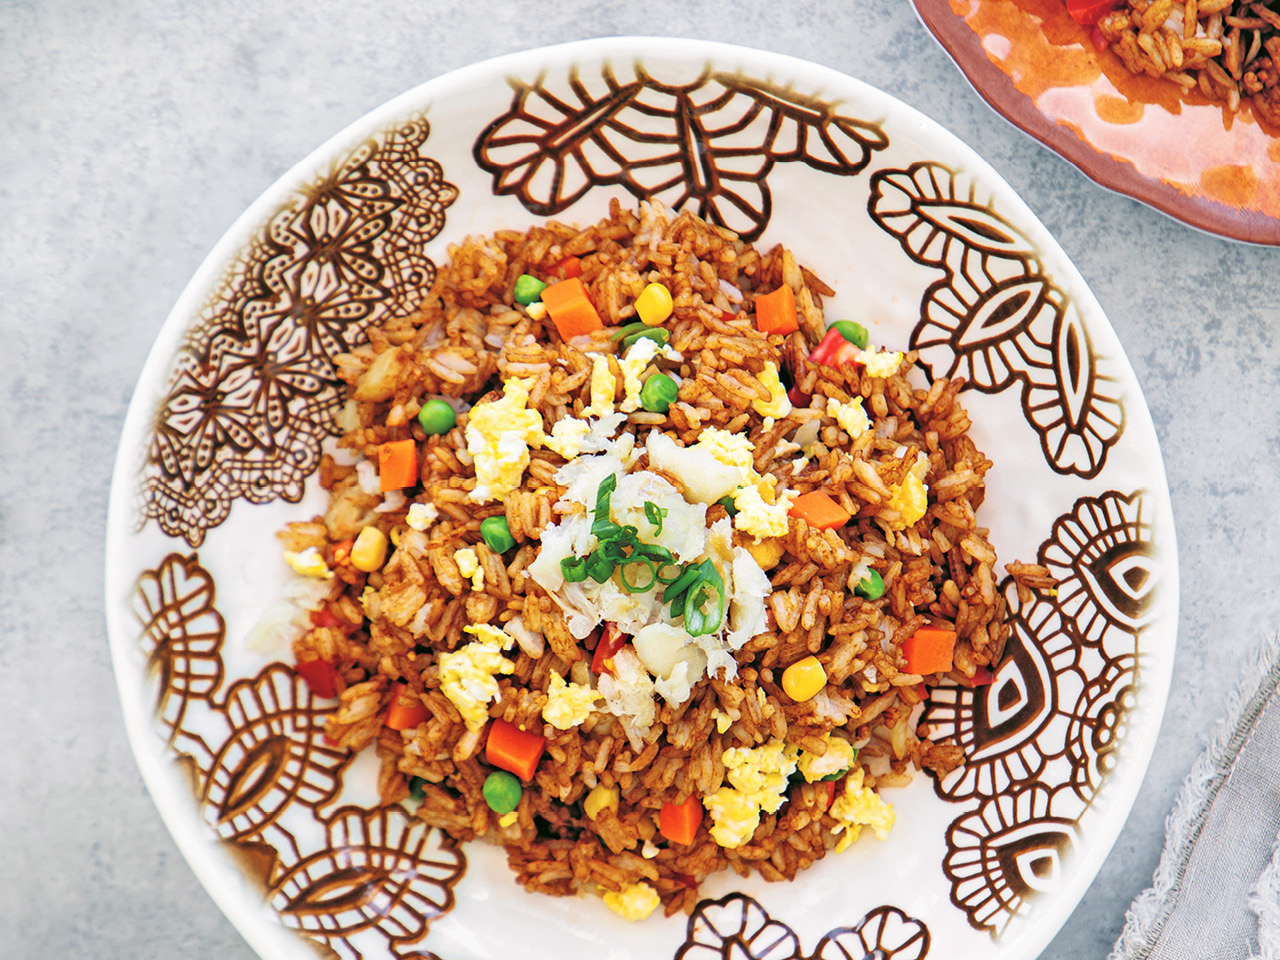 Adrian Forte's Salted Cod Fried Rice